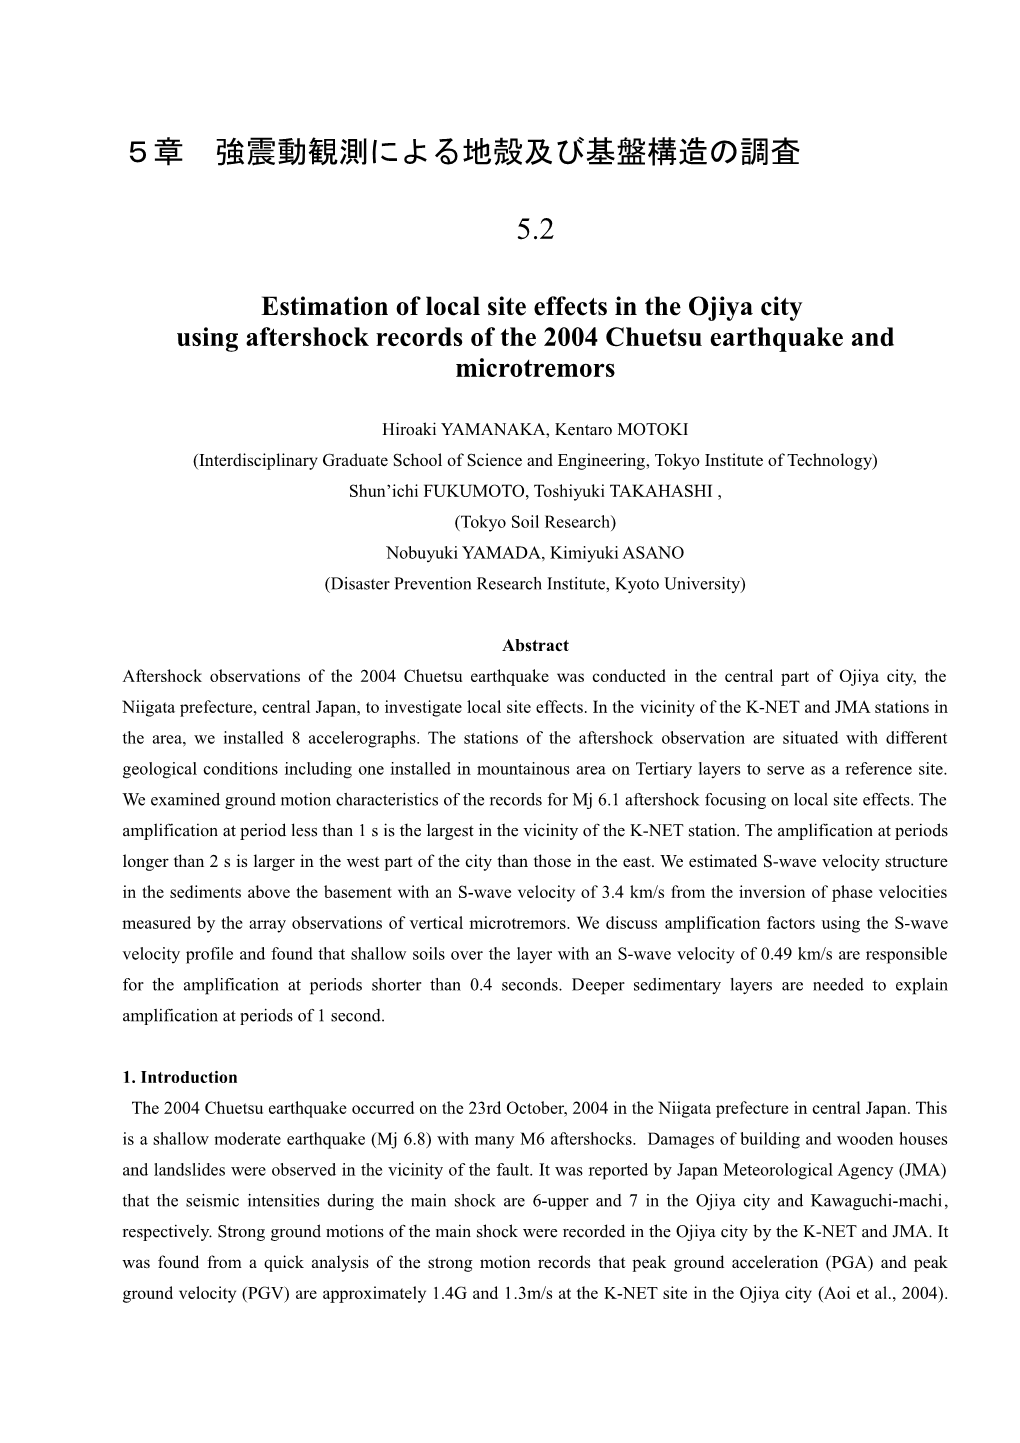 Estimation of Local Site Effects in the Ojiya City